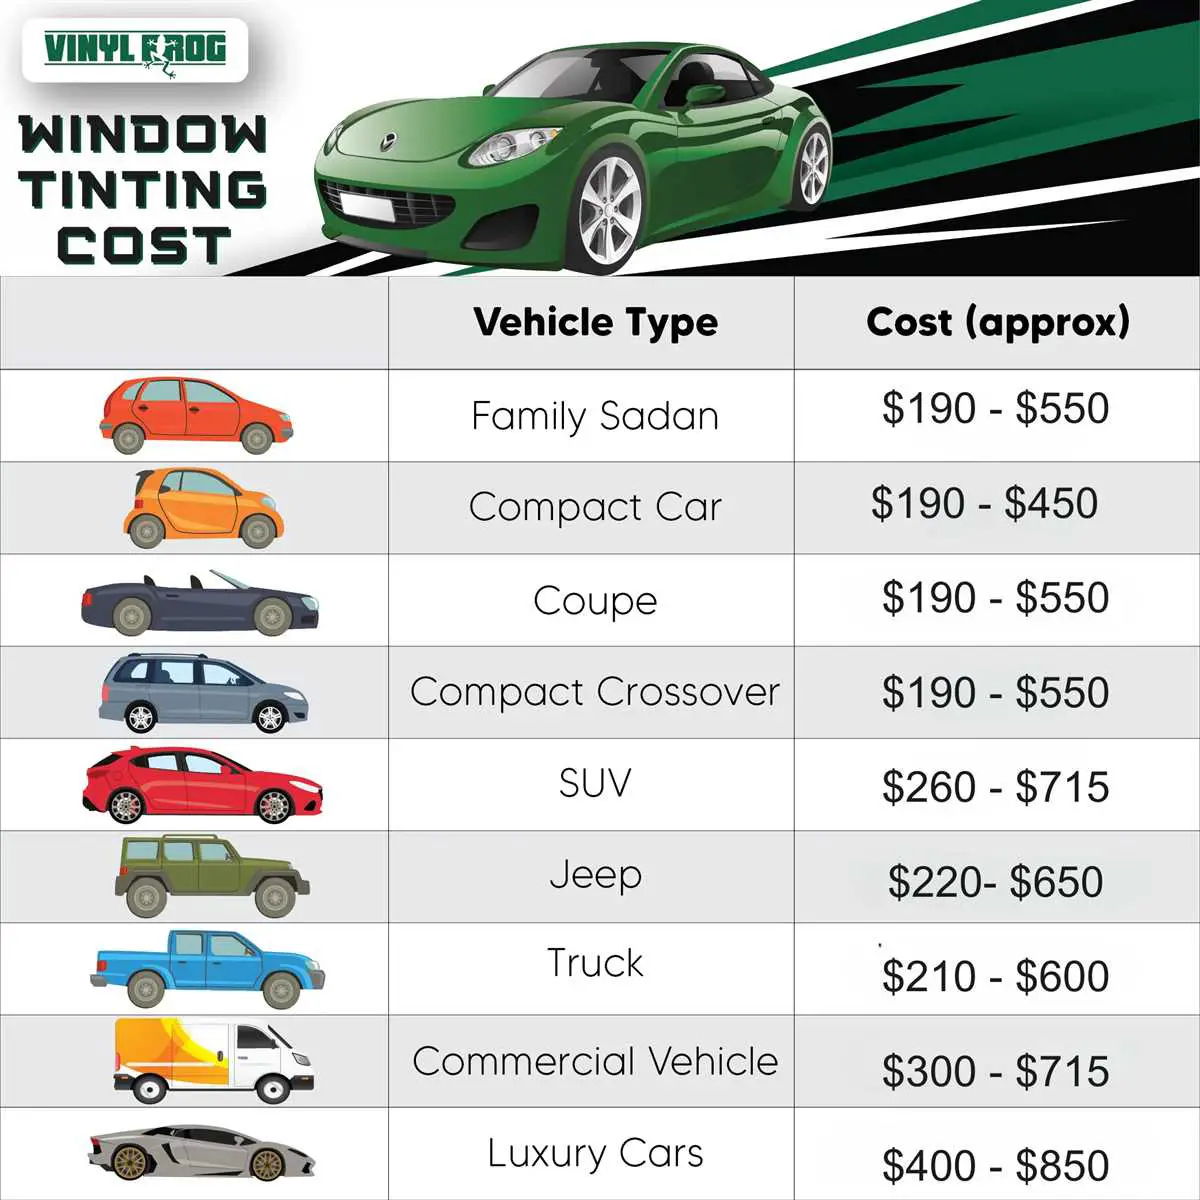 Does tinting reduce car value